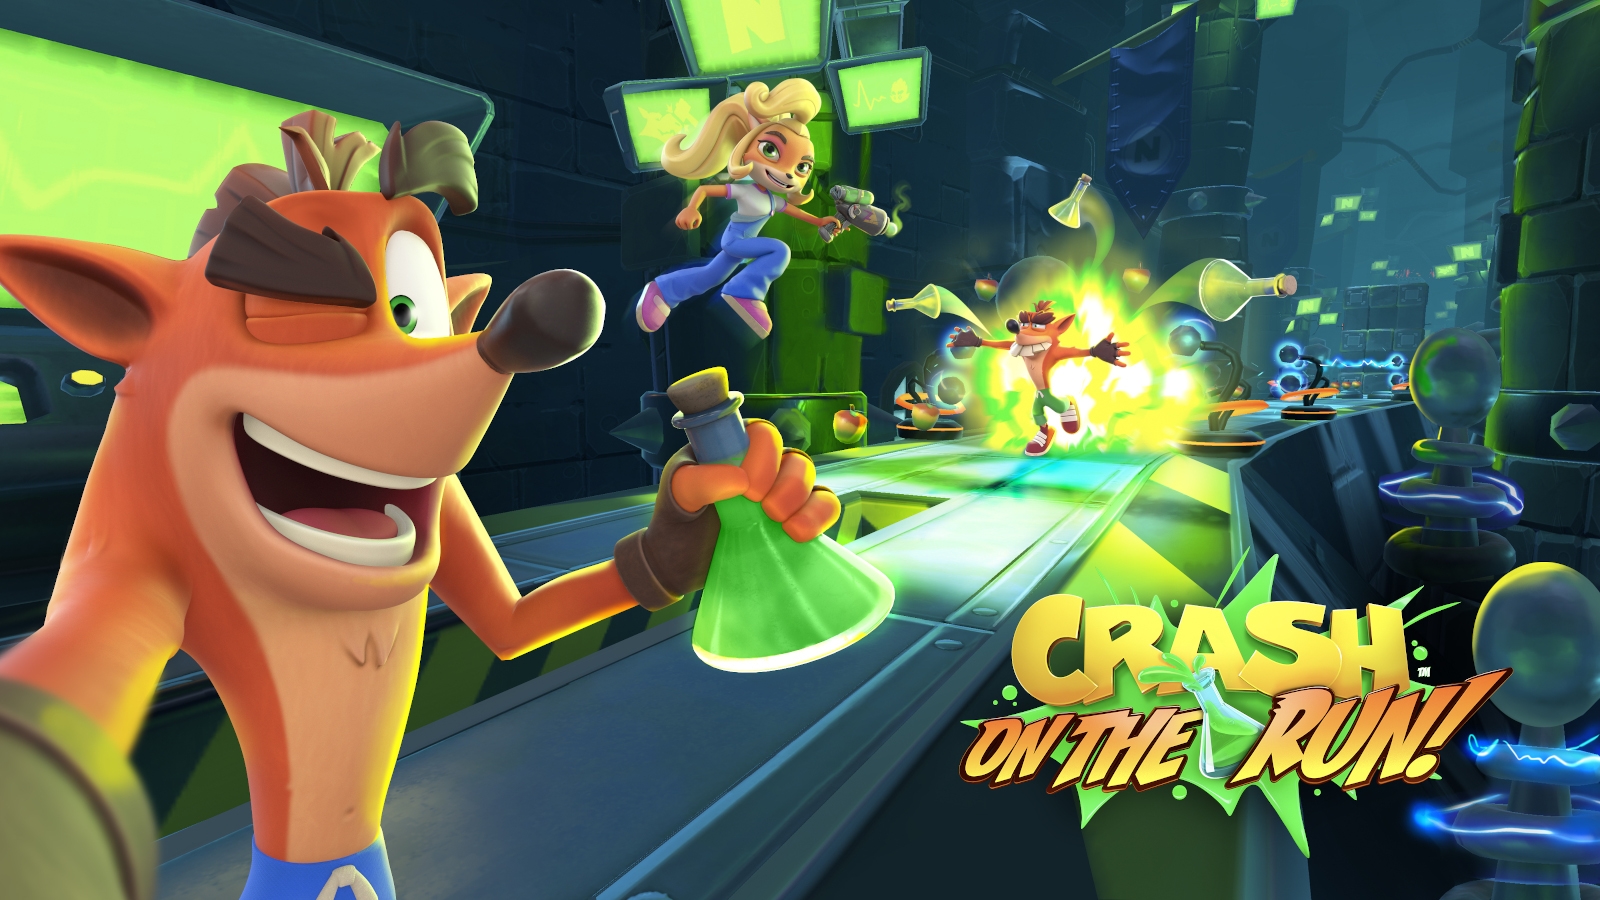 Crash Bandicoot is landing on Android and iOS devices in spring 2021 | DeviceDaily.com